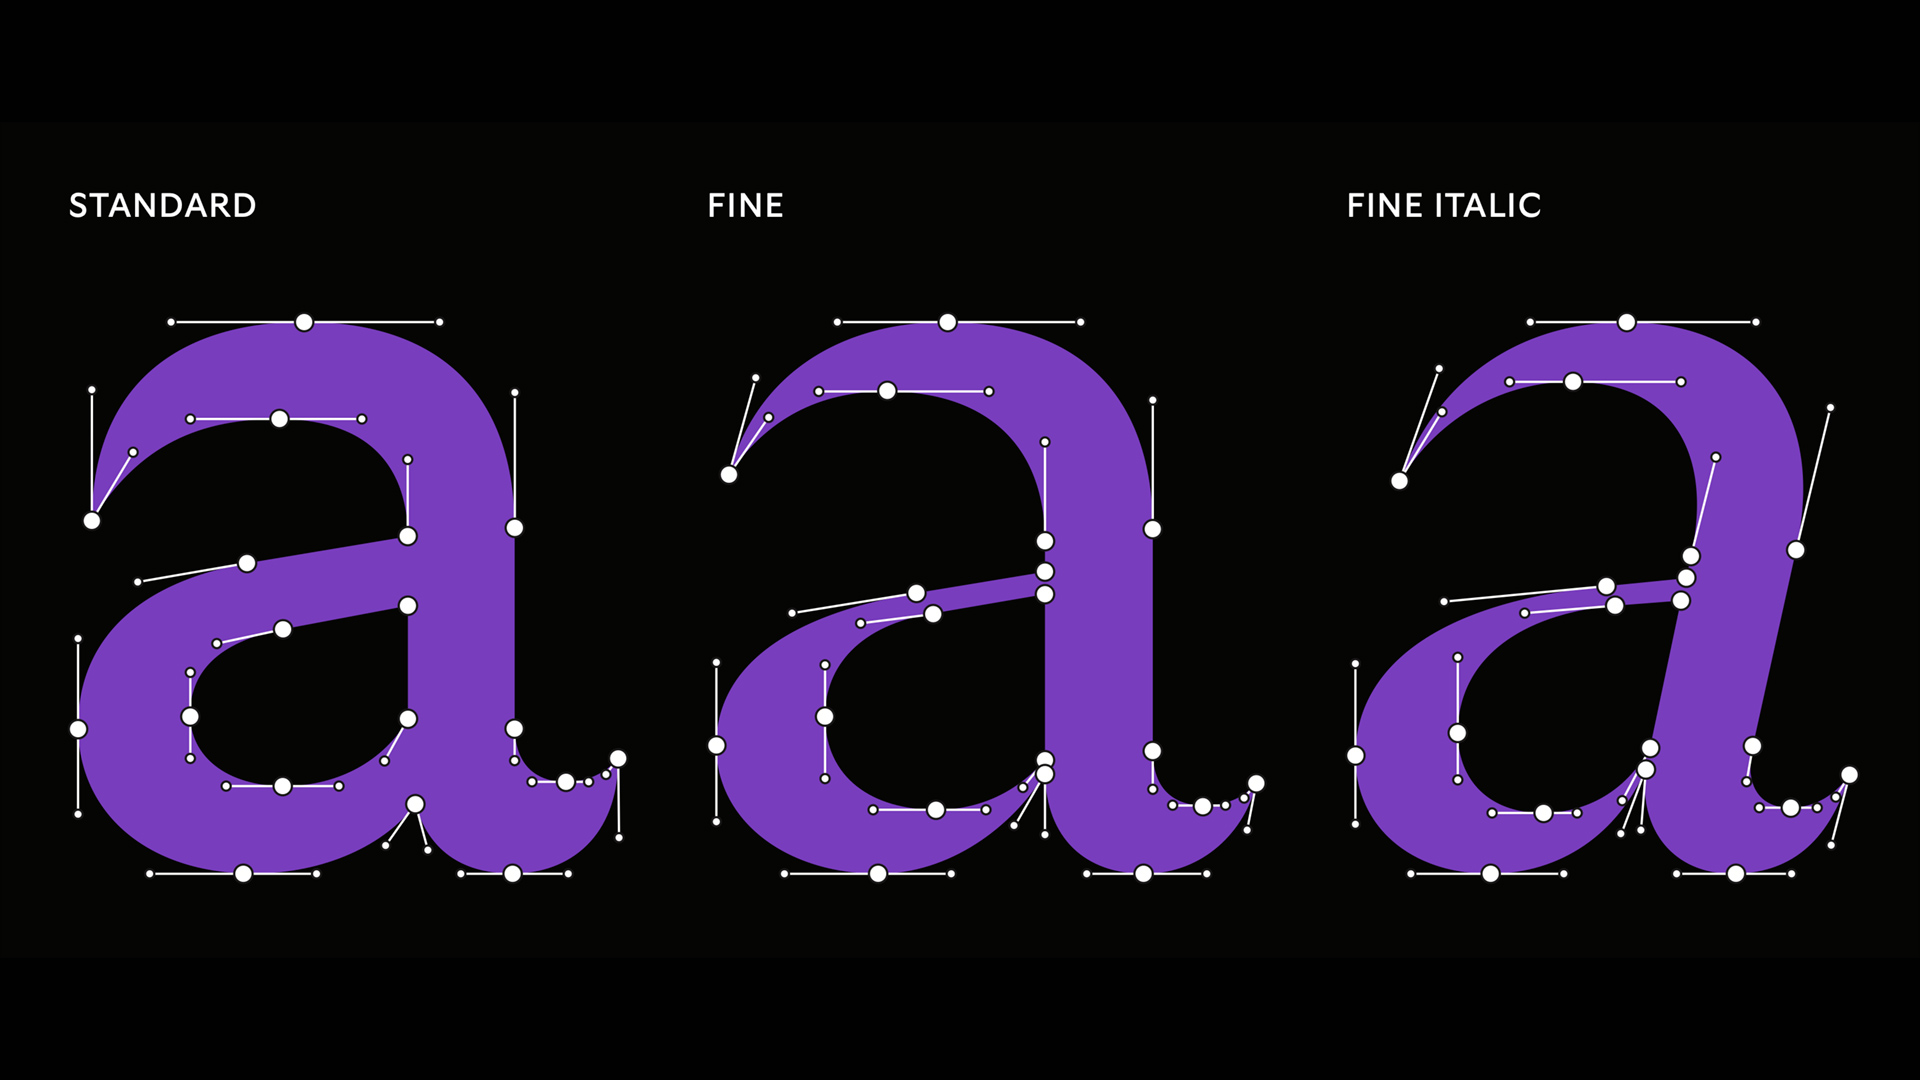 05 90705176 this new font breaks the biggest unspoken rule in typefaces